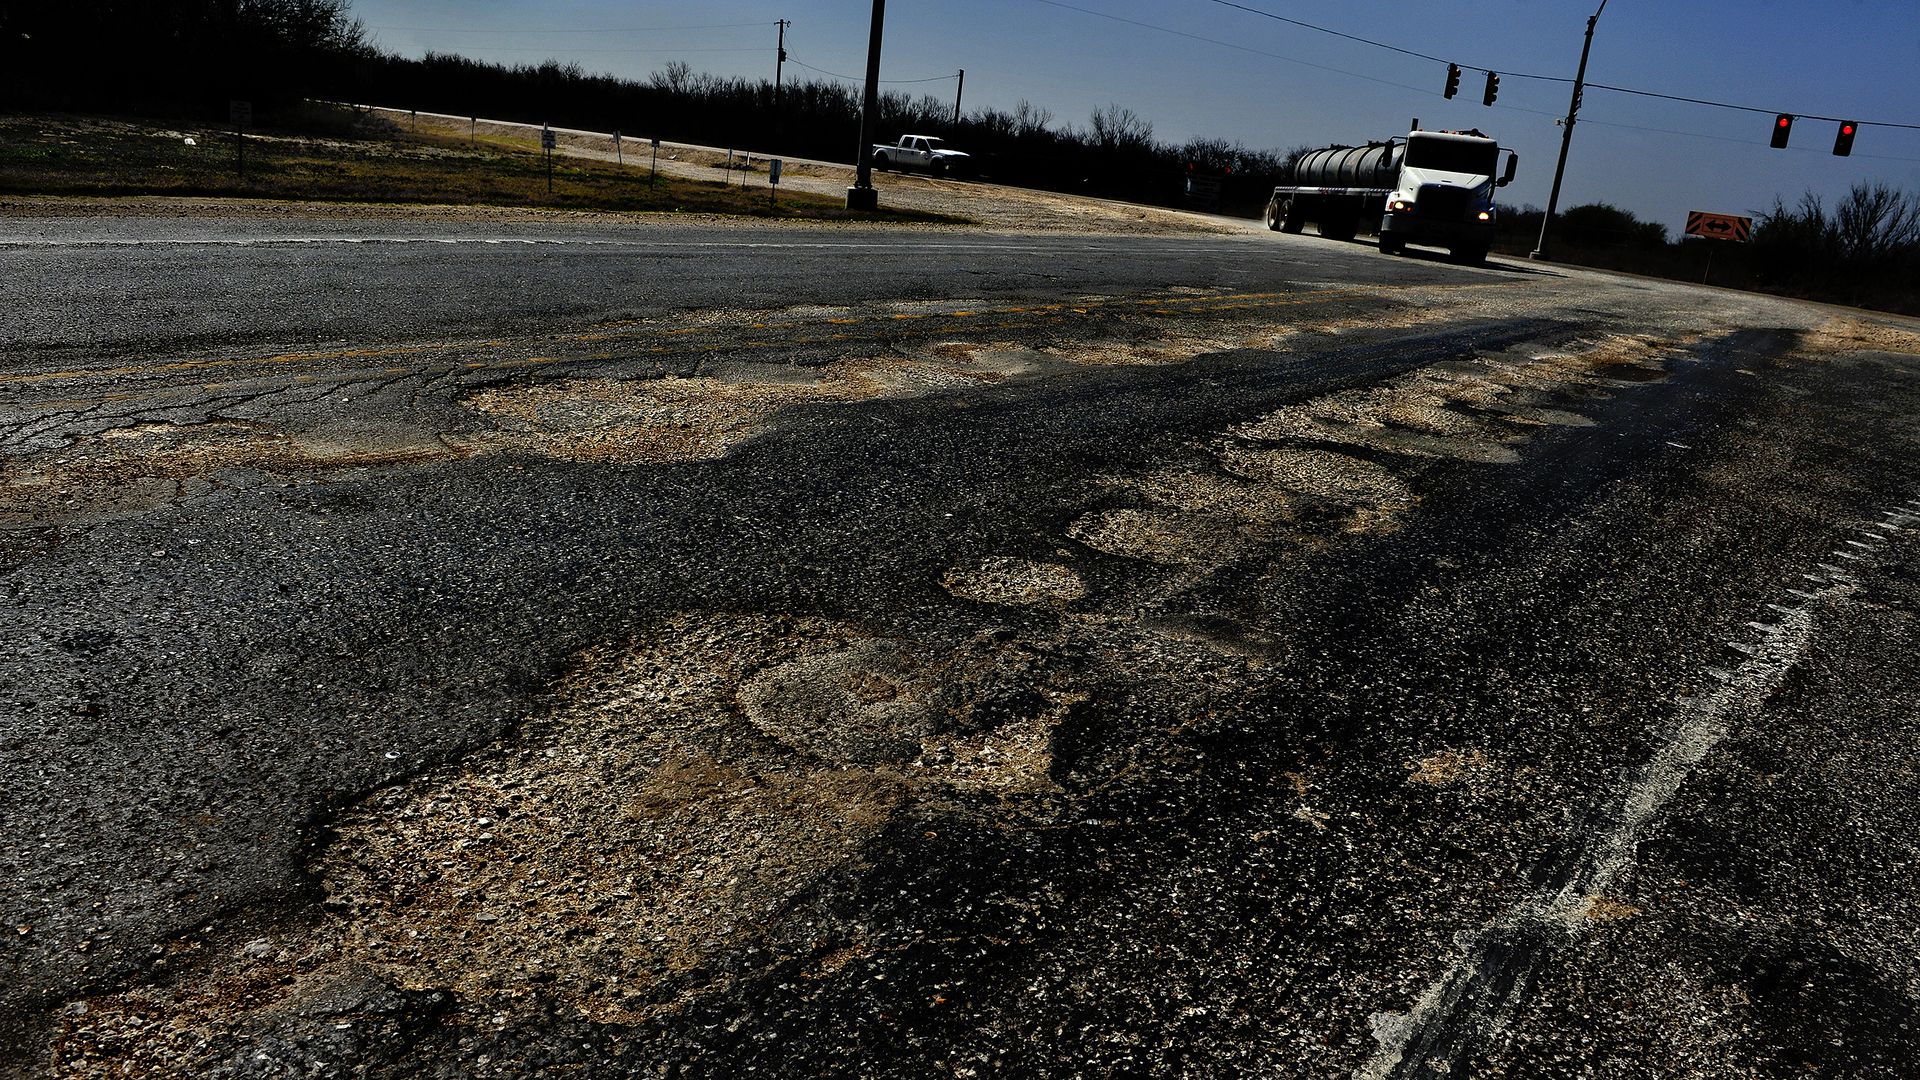 Sections of Highway 72 near Fowlerton, Texas, show the wear and tear from the huge amount of oil industry truck traffic.